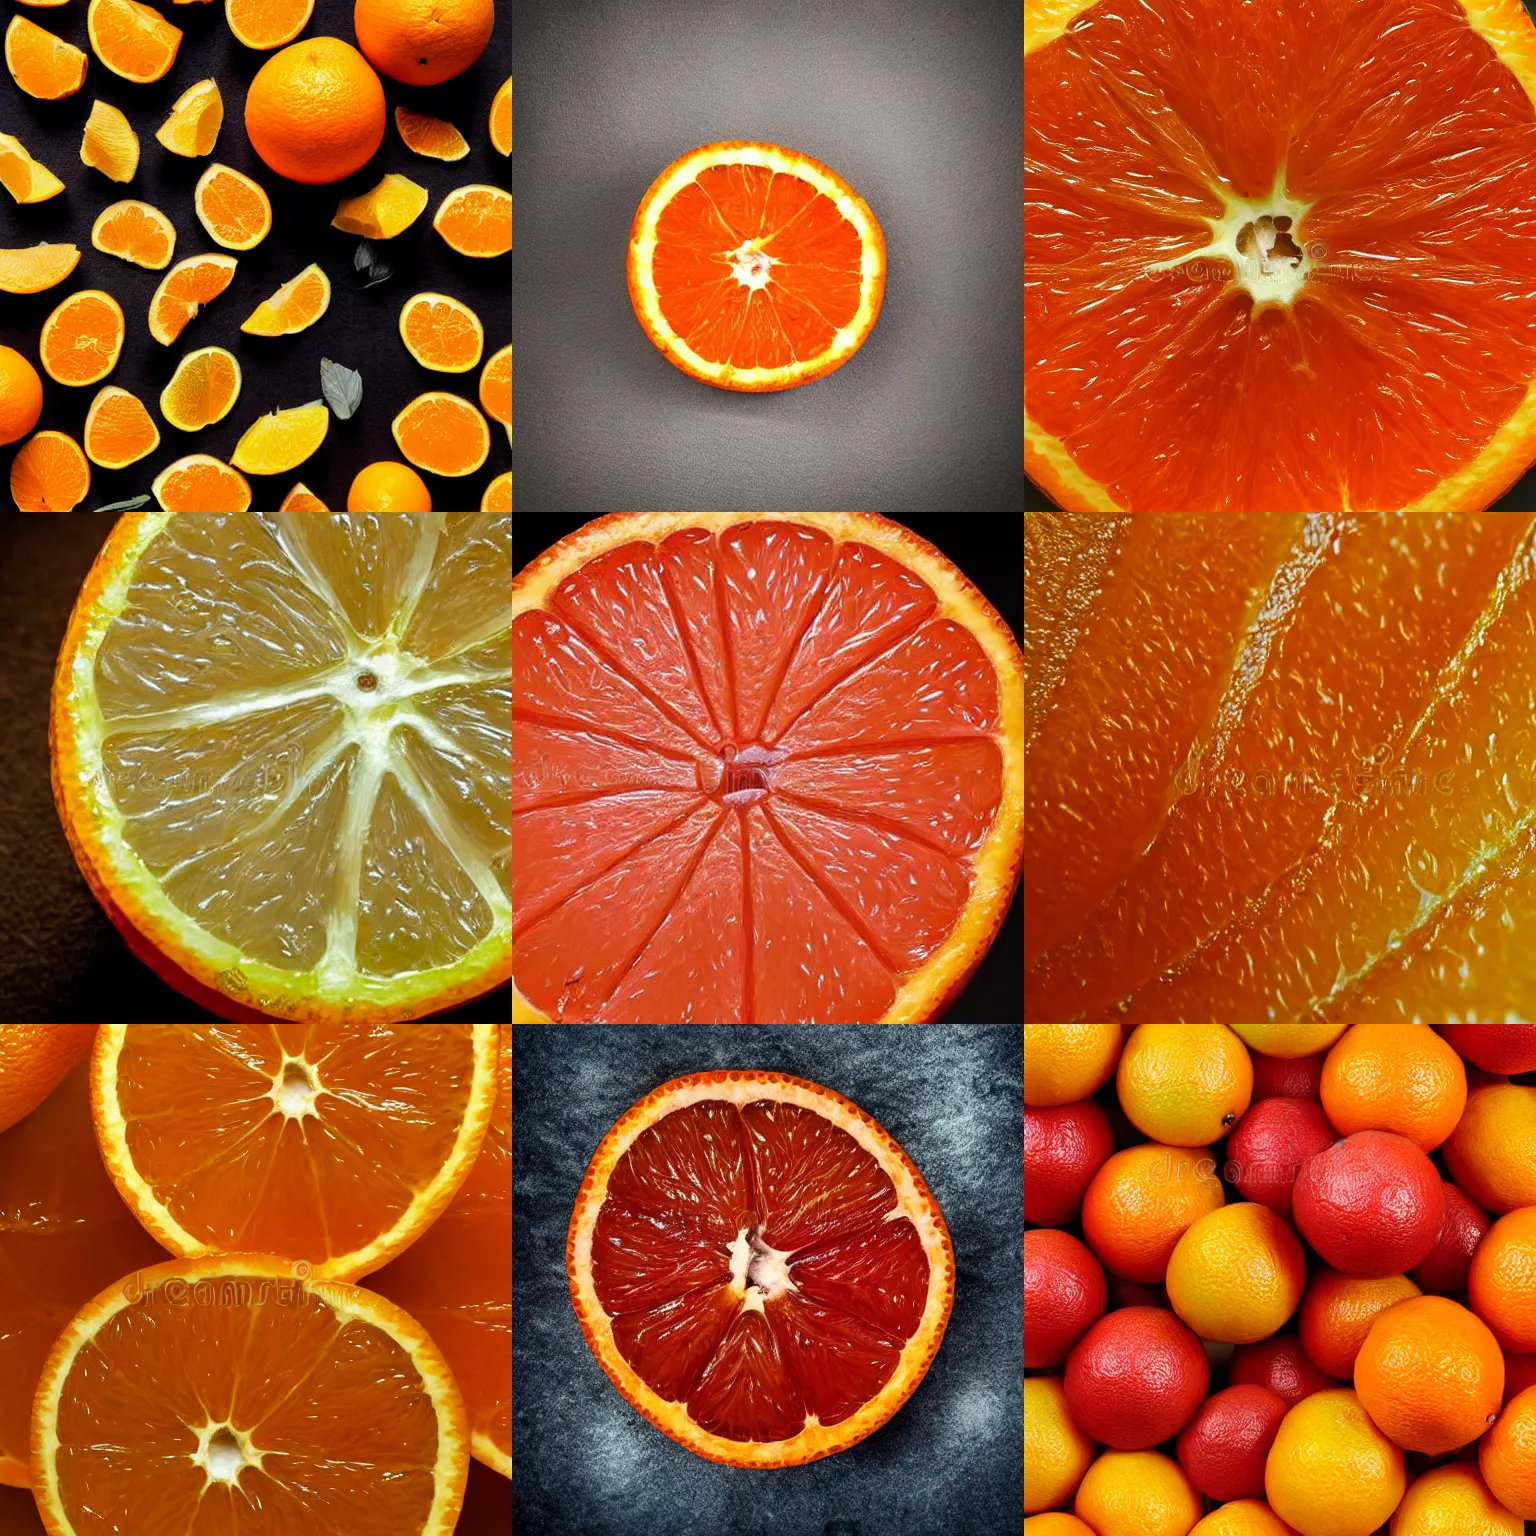 Prompt: zoomed in juicy orange fruit, high quality stock photo texture, softbox studio lighting, high contrast